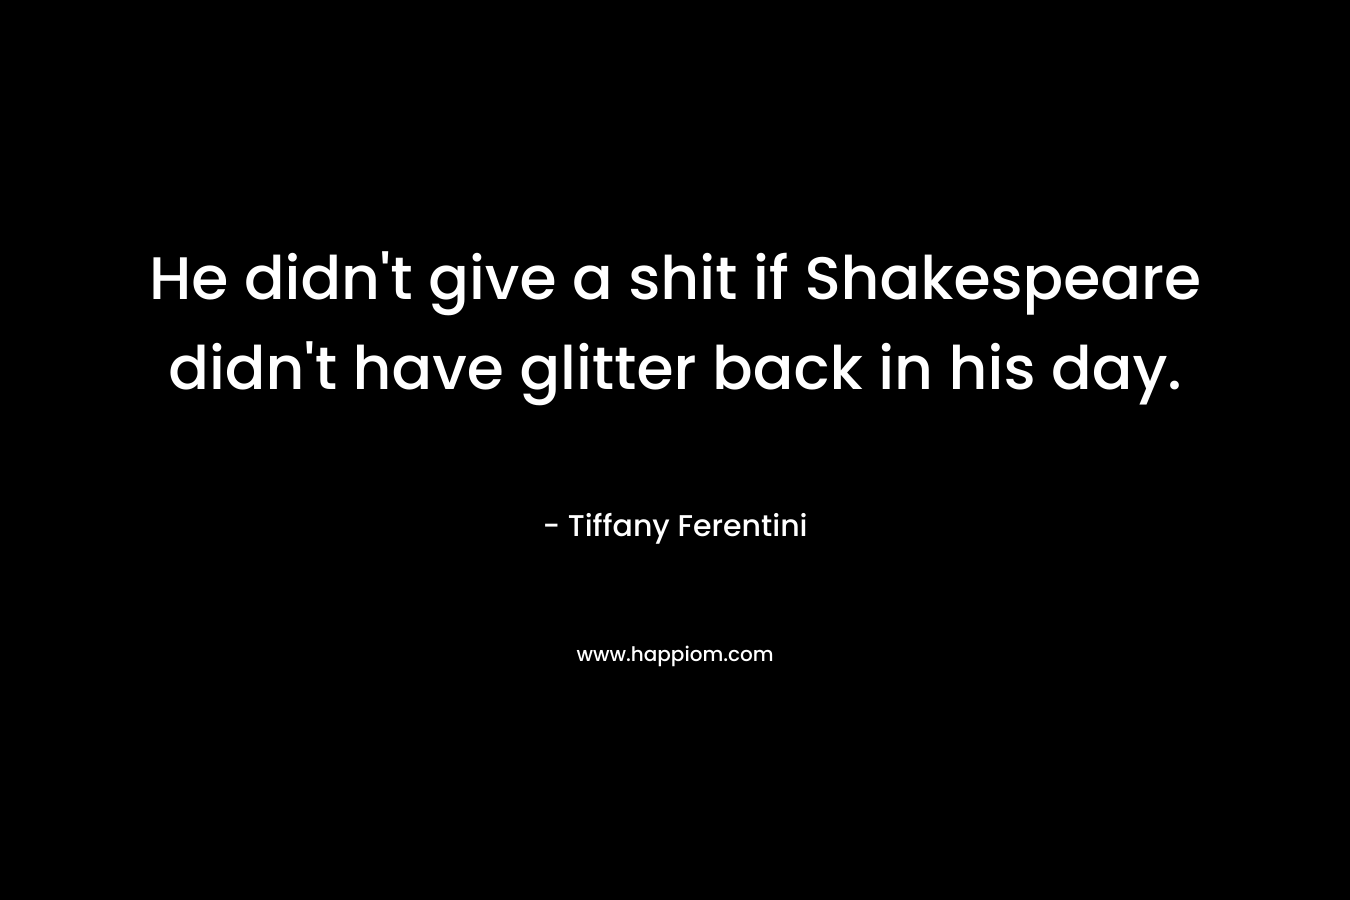 He didn't give a shit if Shakespeare didn't have glitter back in his day.